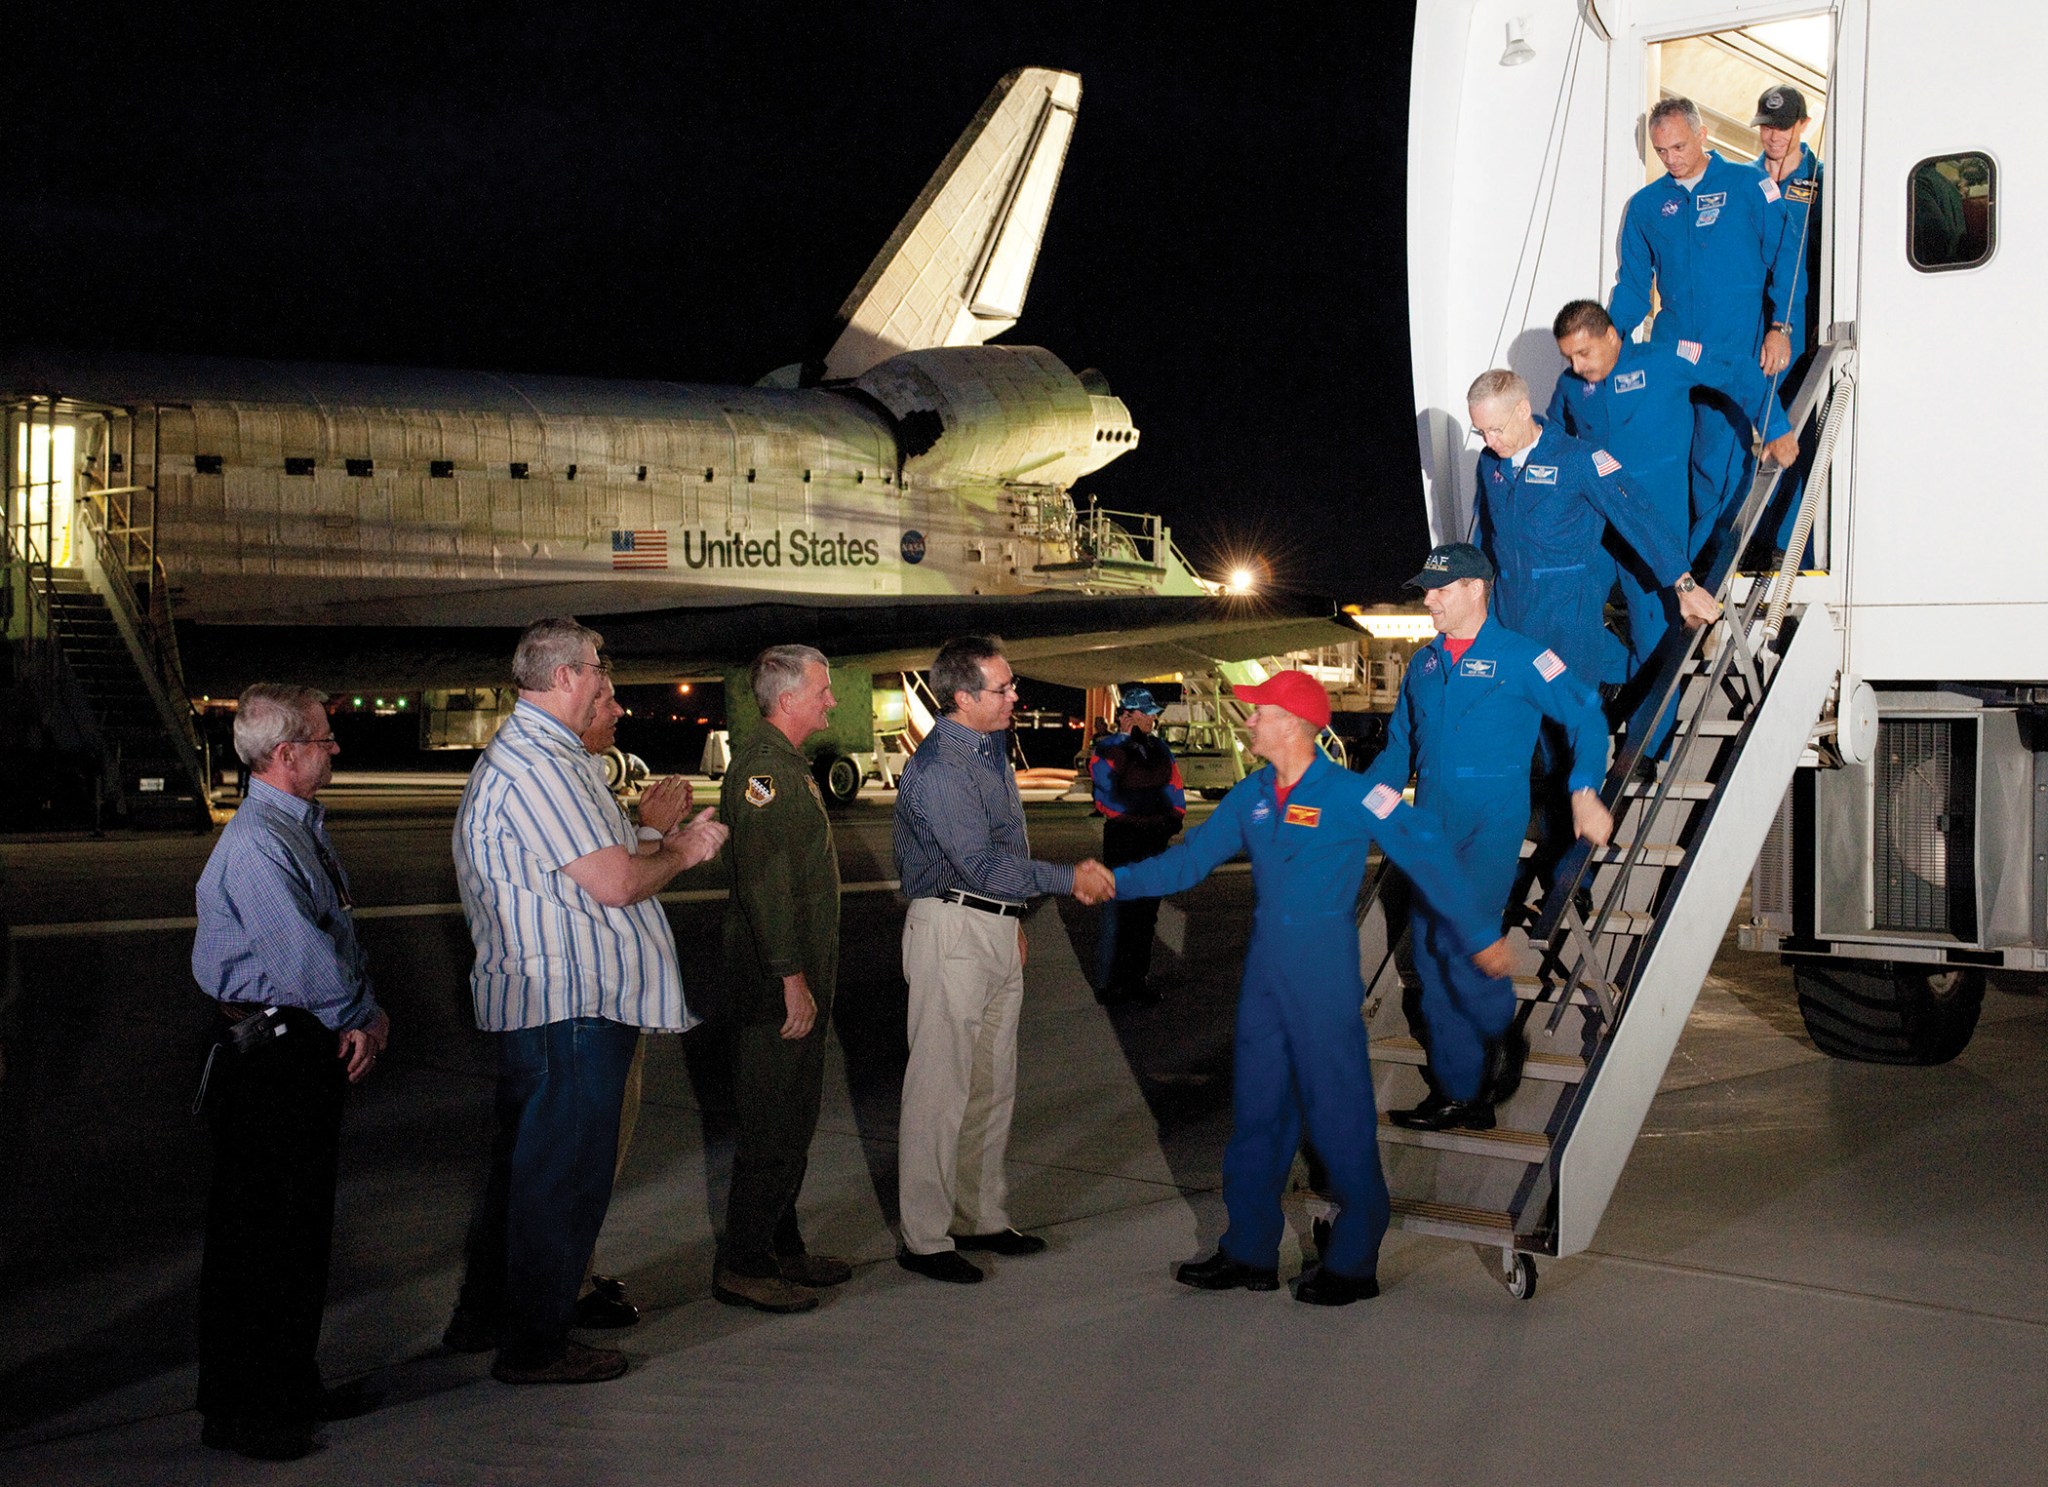 Space shuttle Discovery crew exiting an aircraft.